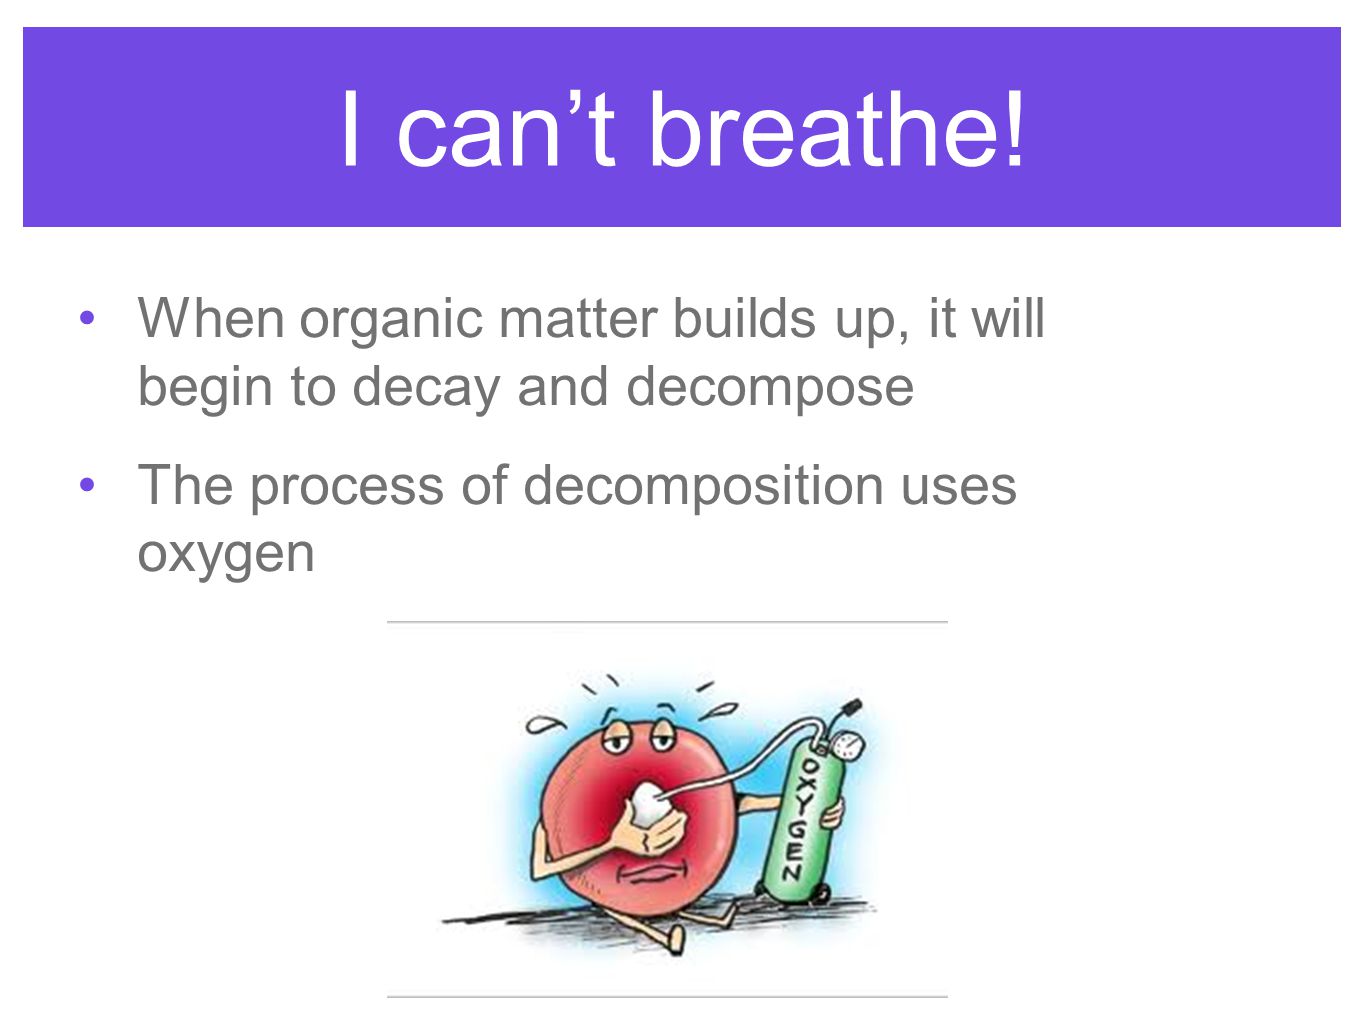 I can’t breathe. When organic matter builds up, it will begin to decay and decompose.